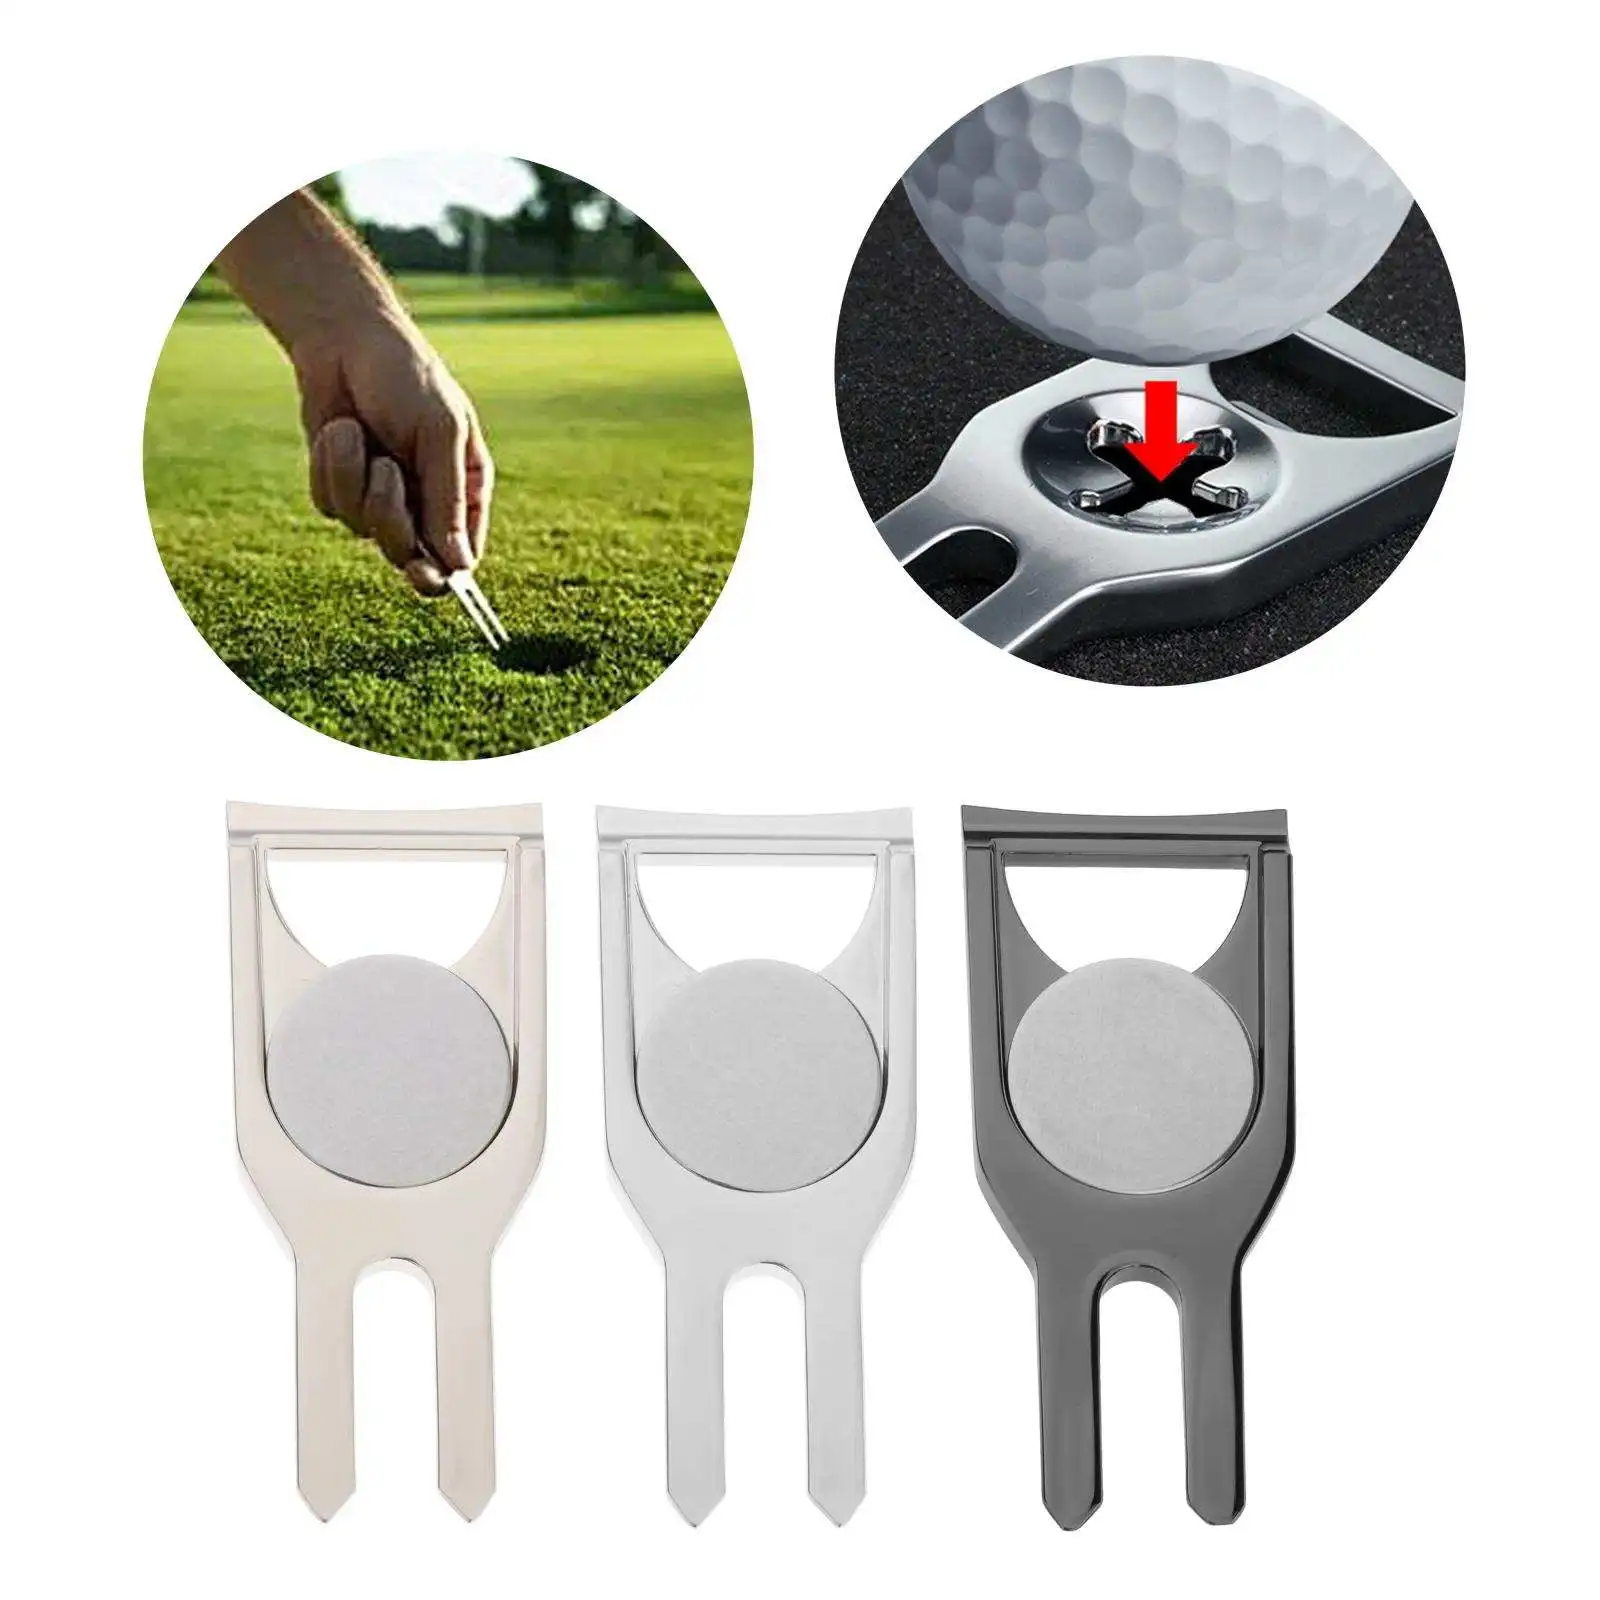 Golf Pitch Mark Score Counter Training Aids Foldable Multifunctional Lawn Golf Divot Portable Putting Green Fork Repair Tools